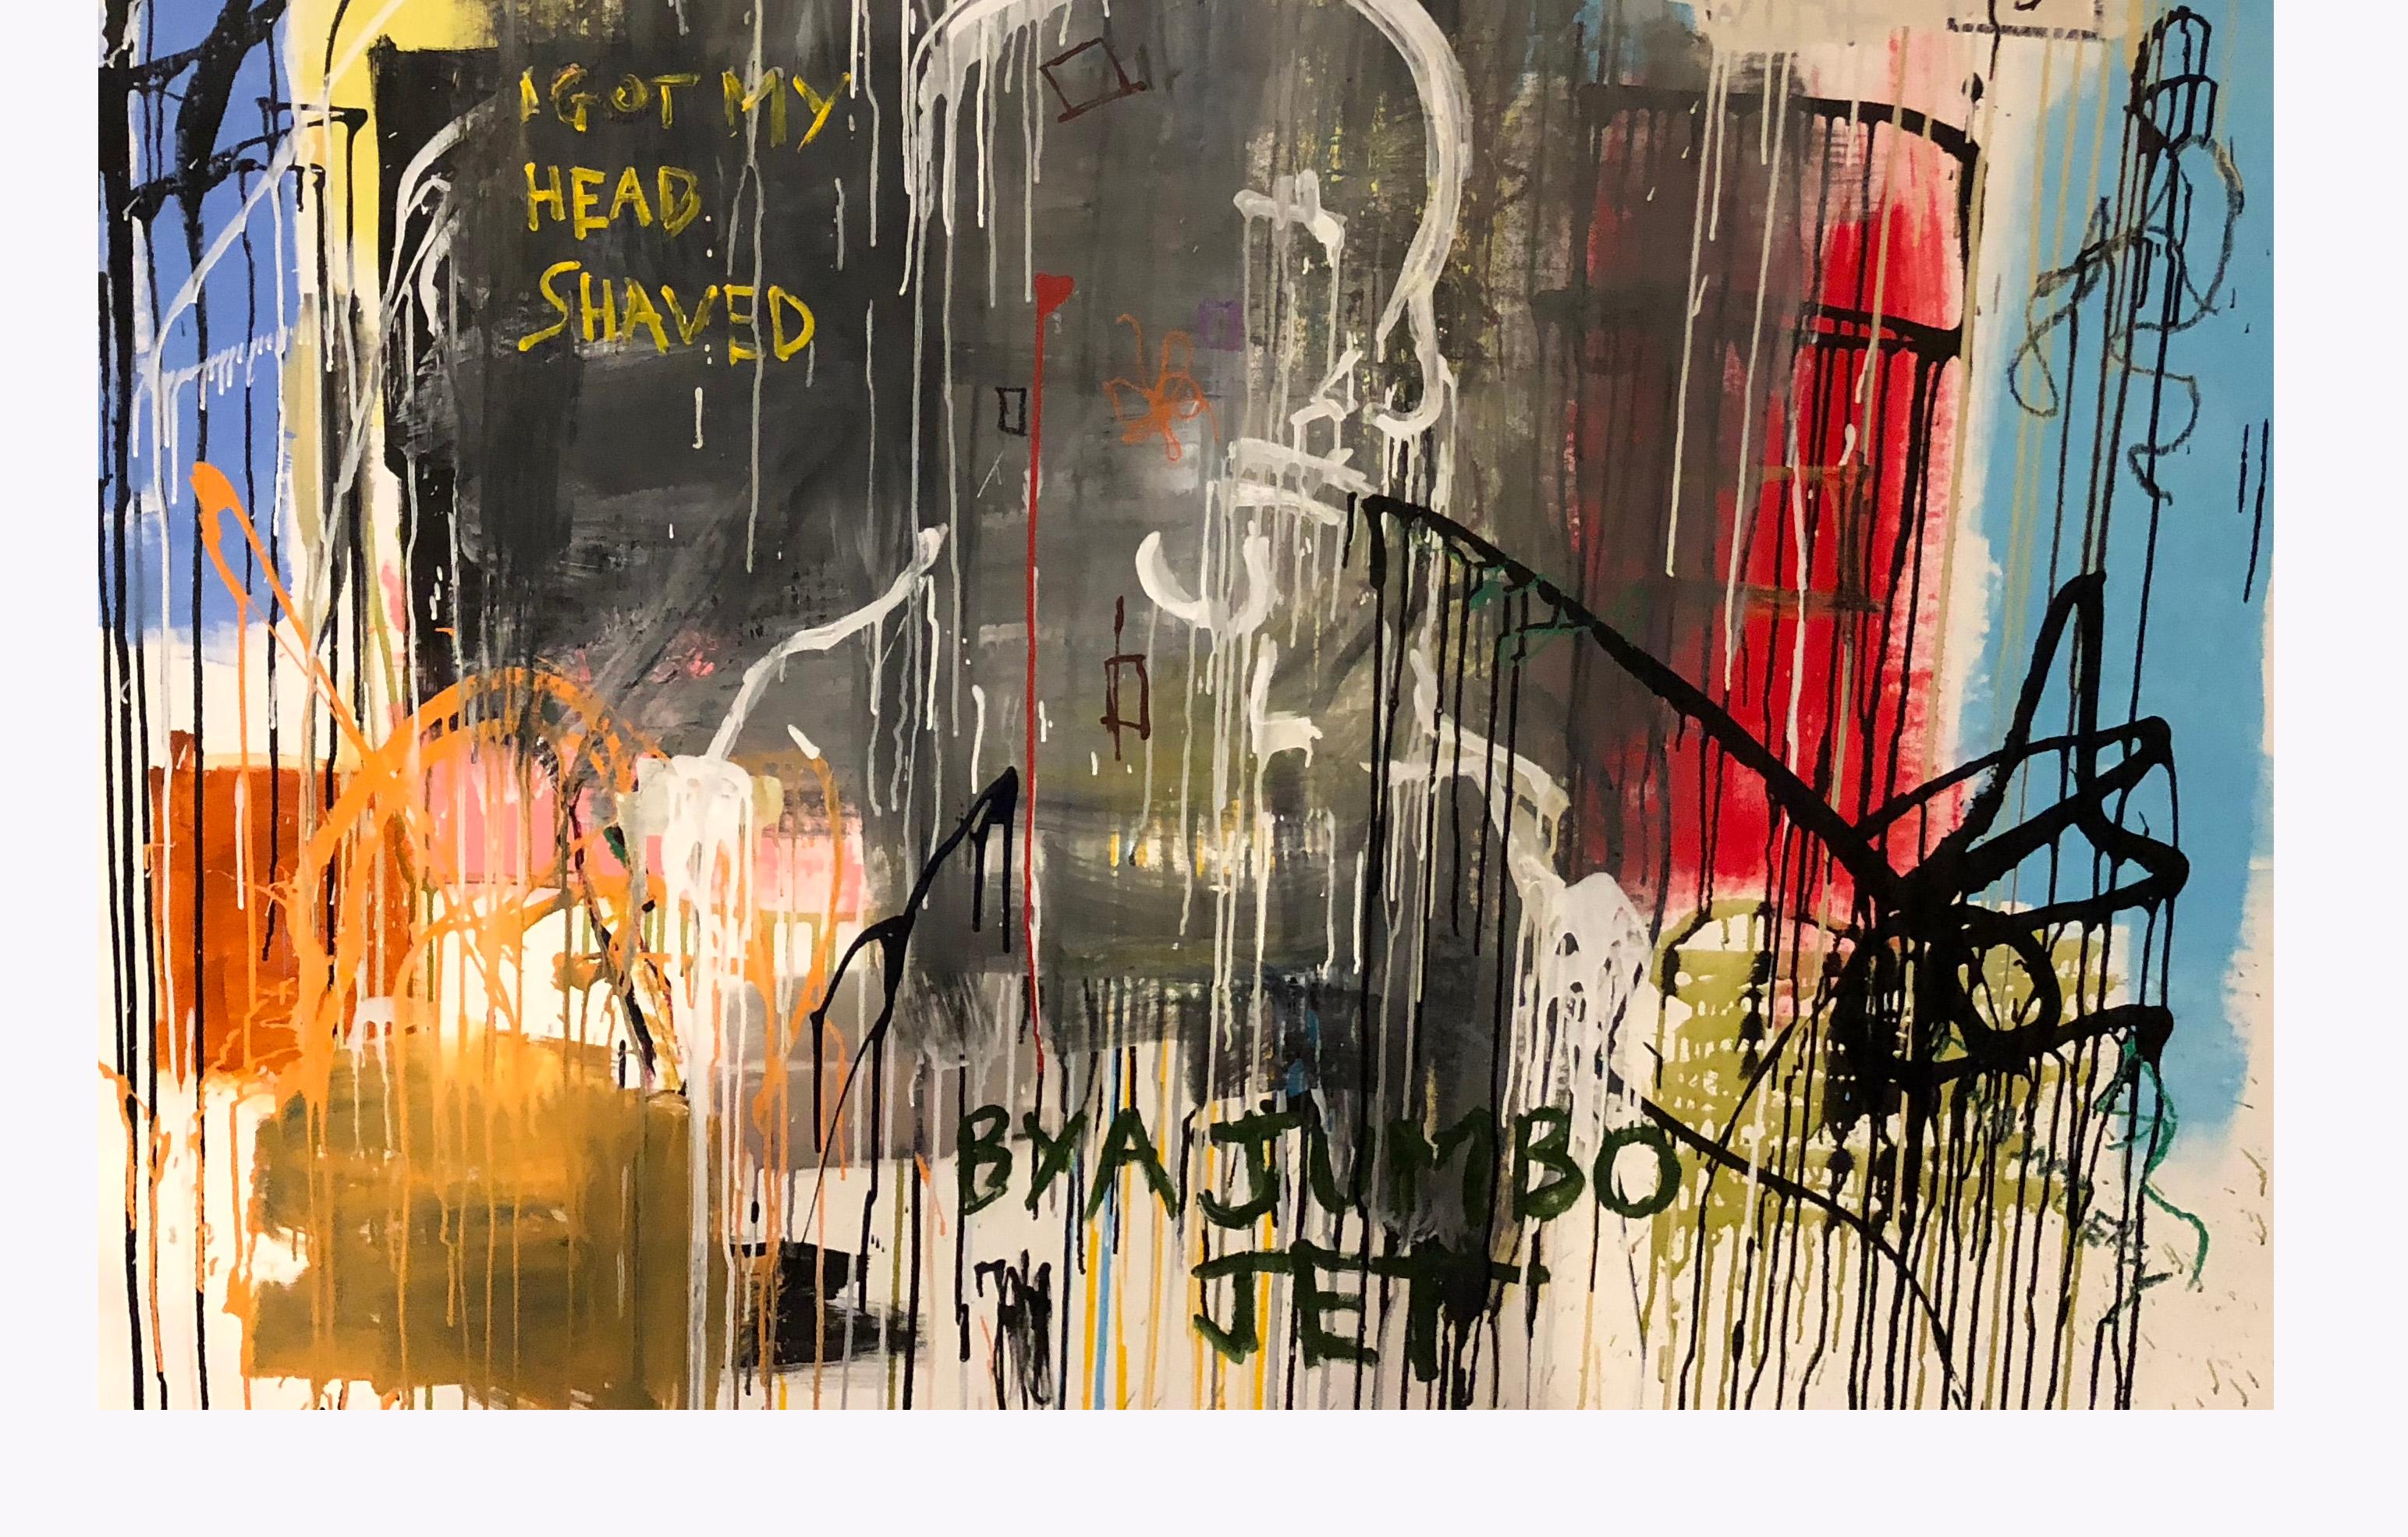 JP JONES

‘Song 2 by Blur’
163 X 153 cm
Acrylic and oil pastel on stretched canvas
£3900

JP Jones (b.1978 Wales) is an international contemporary artist and acclaimed musician, whose work has taken him all around the world. With a career spanning